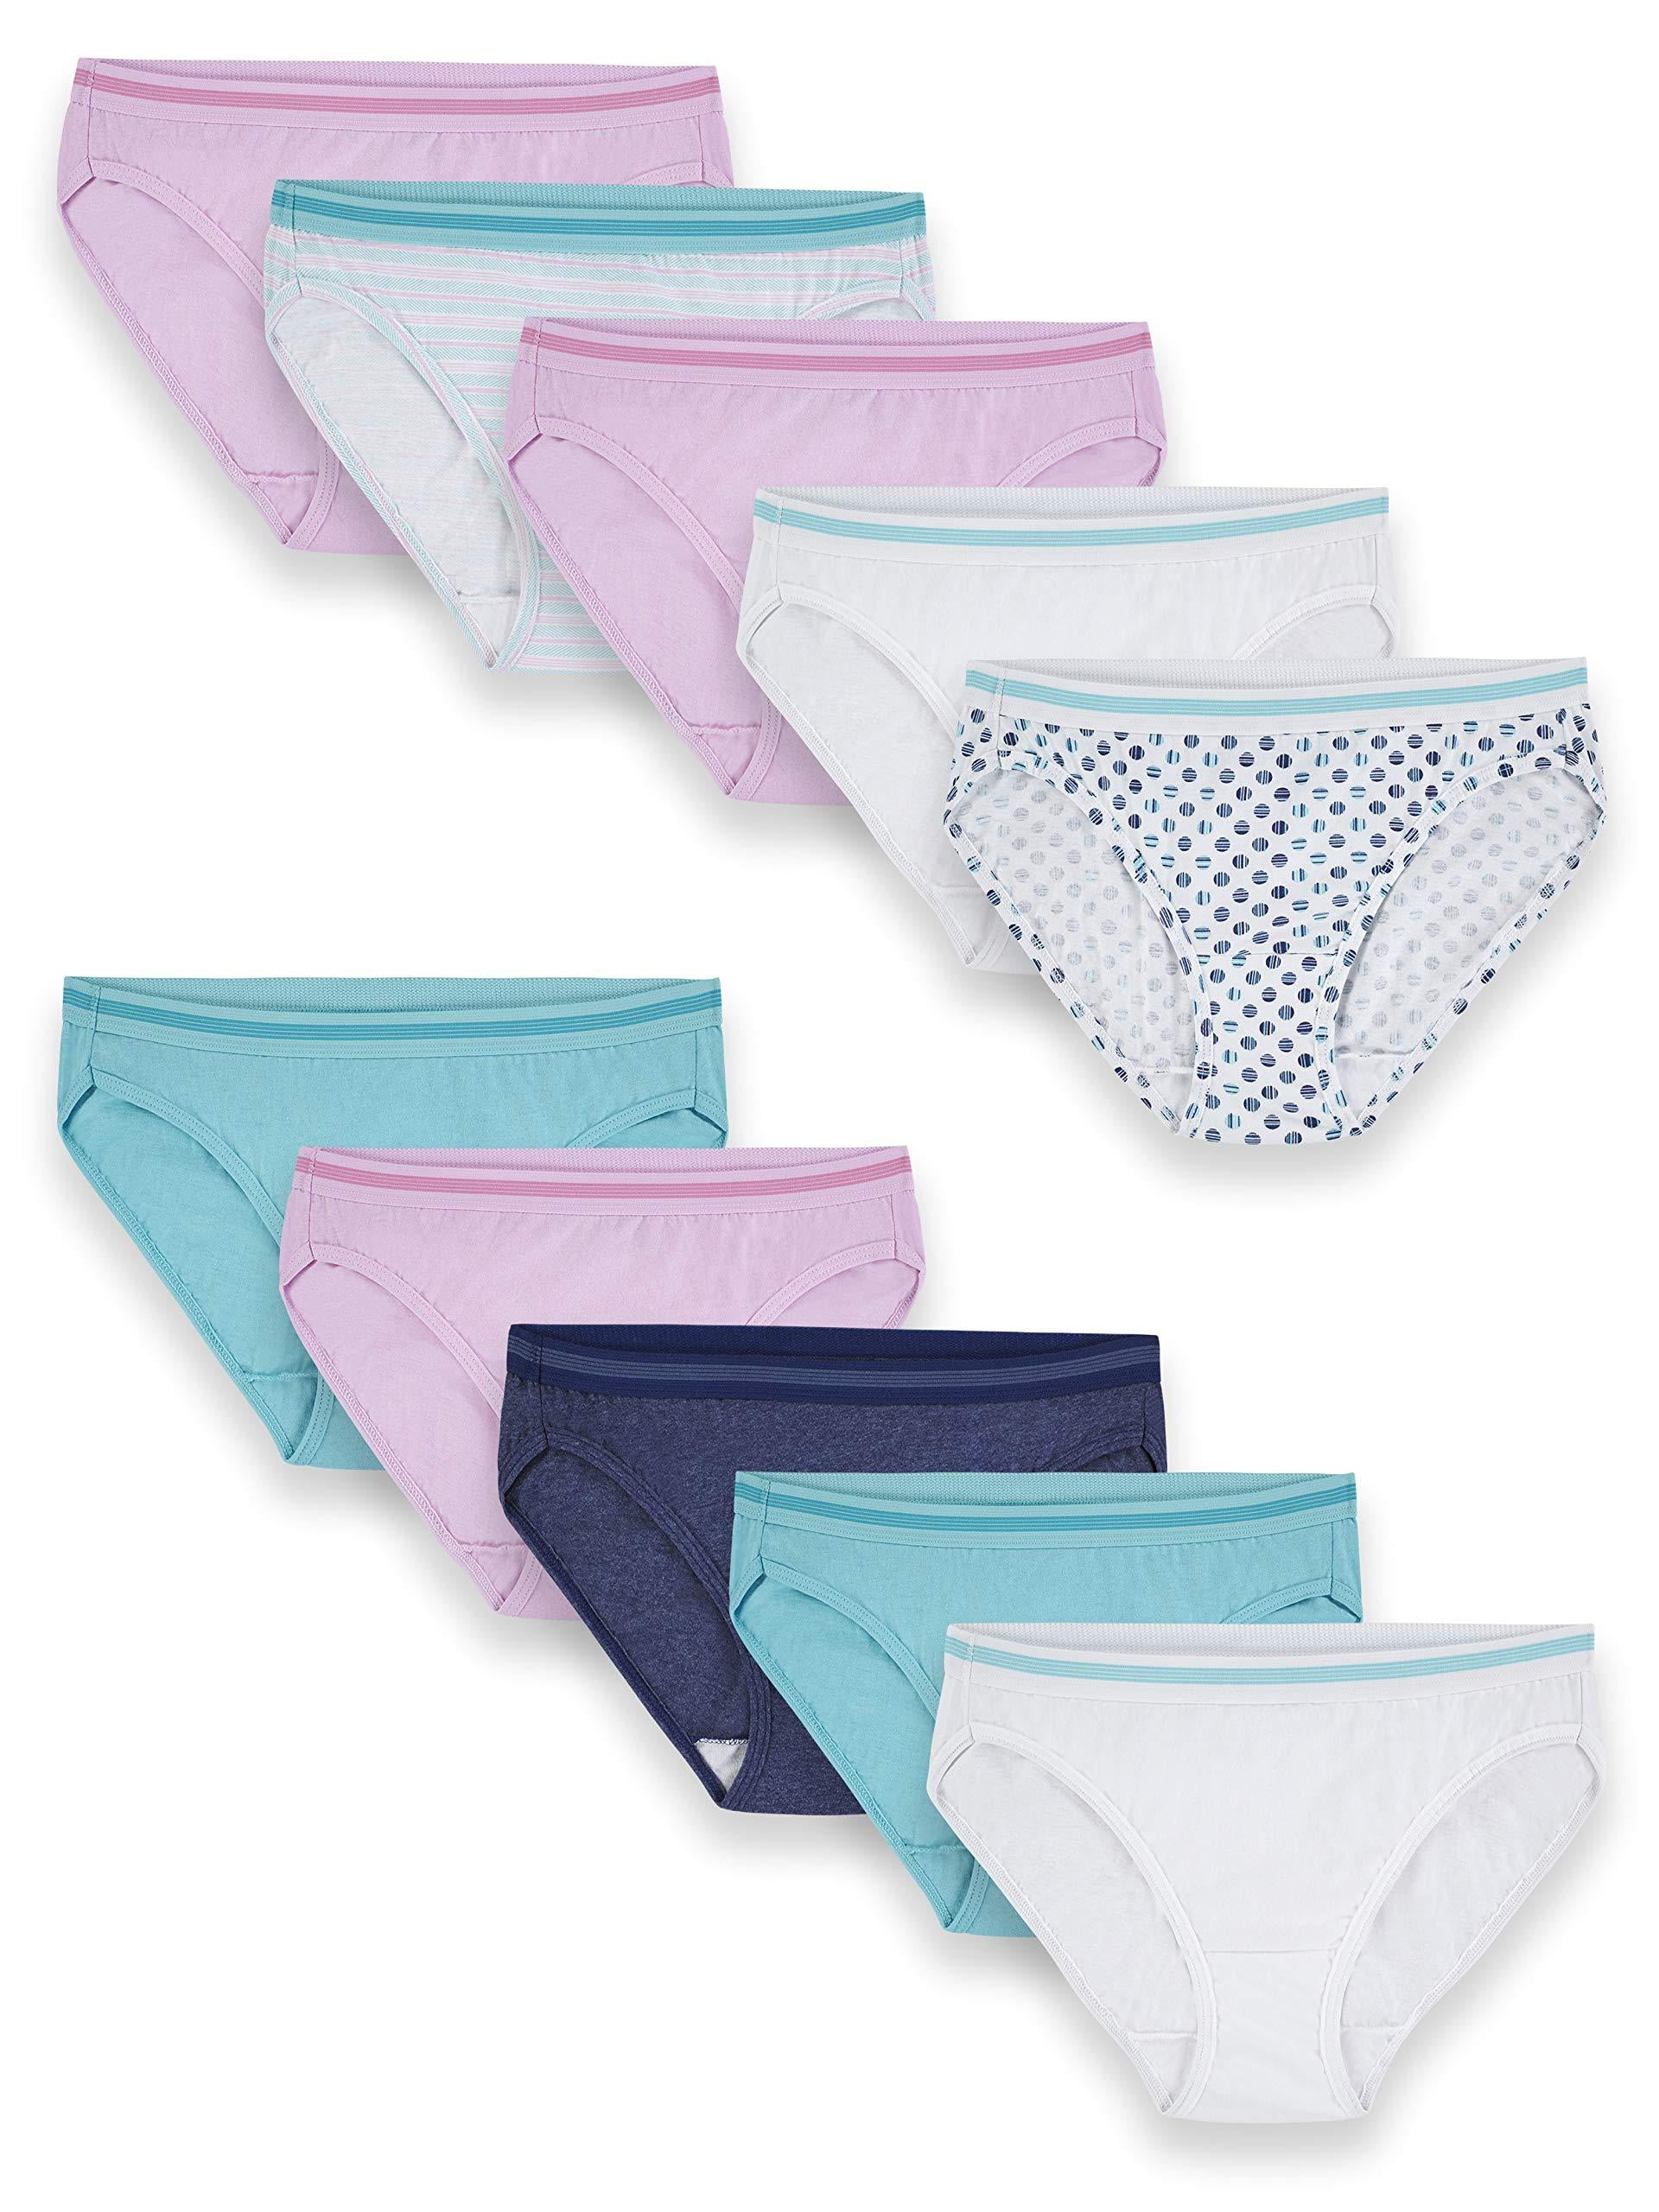 Fruit of the Loom Women's Tag Free Cotton Bikini Panties 10 10 Pack -  Assorted Colors 7